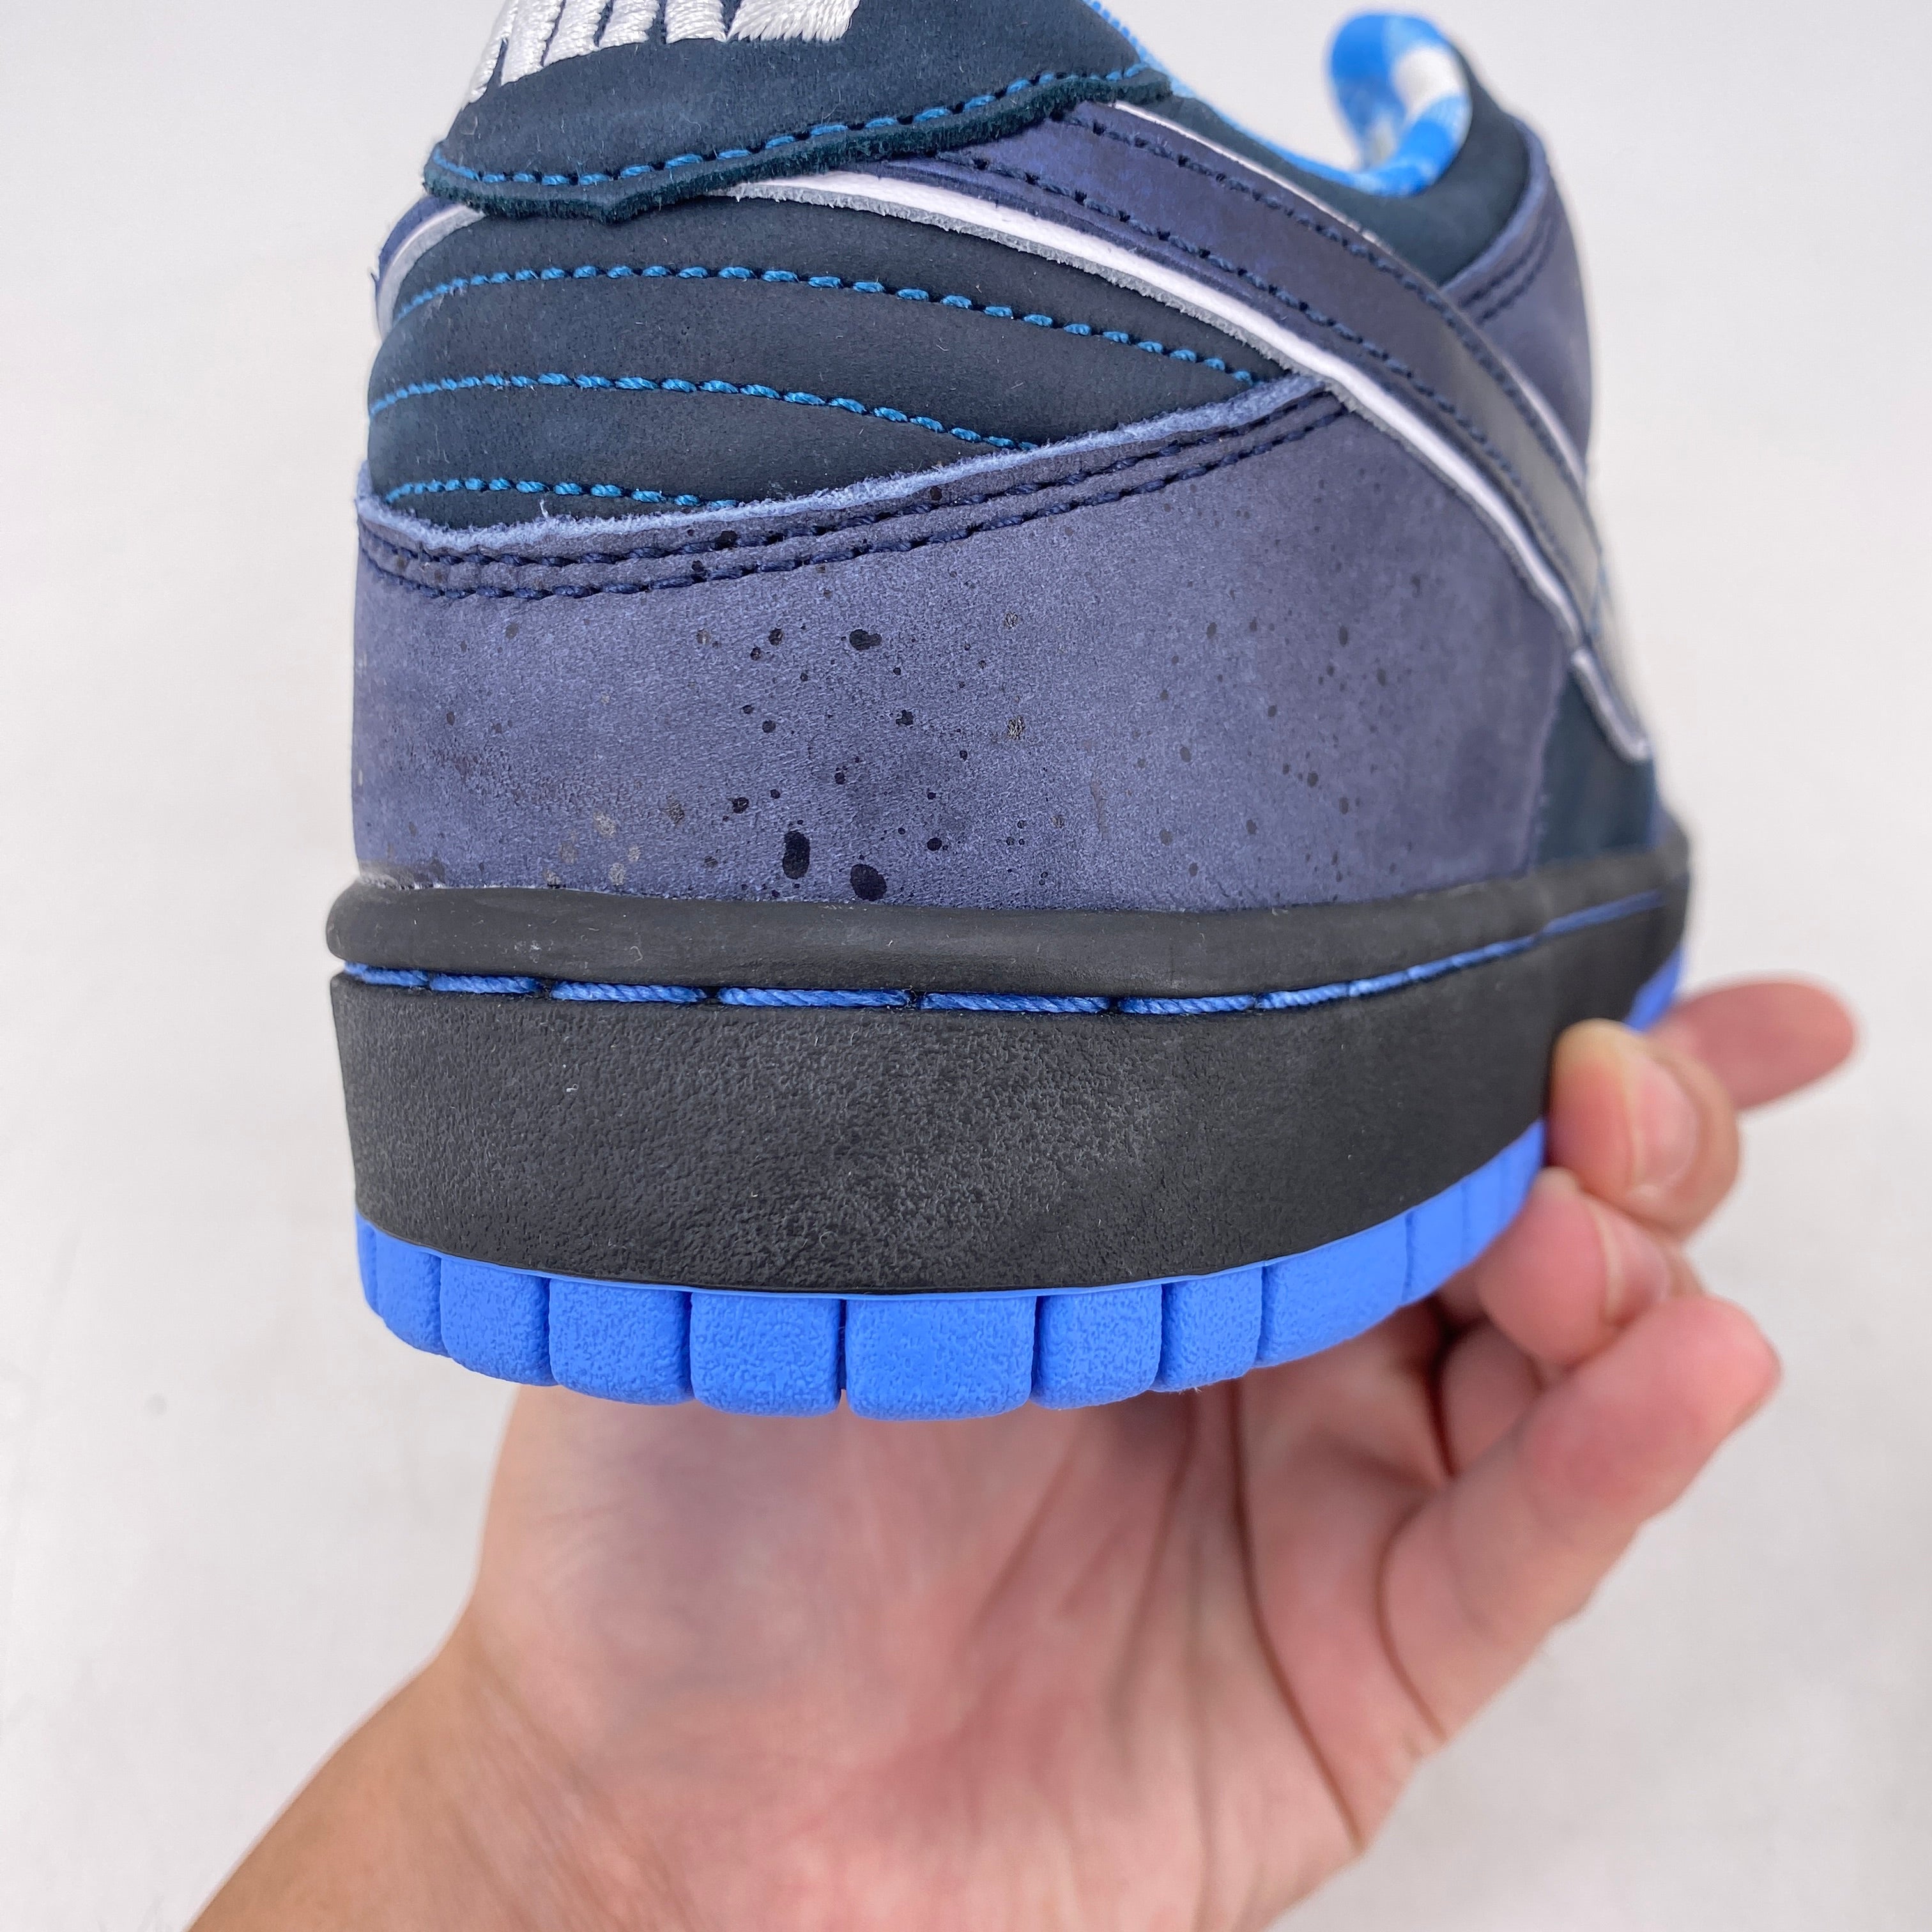 Nike SB Dunk Low &quot;Blue Lobster&quot; 2009 New Size 10.5